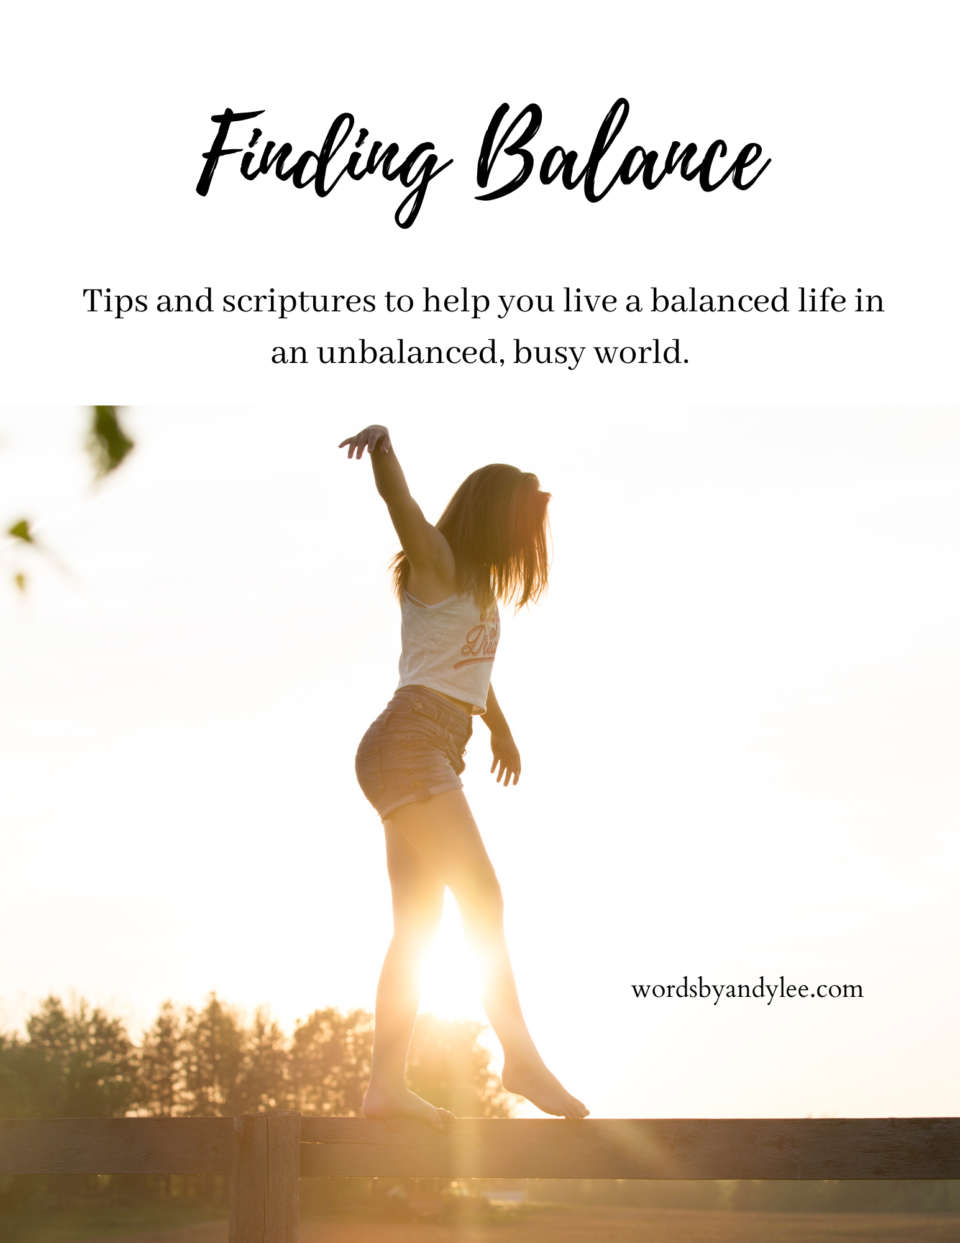 how to find balance